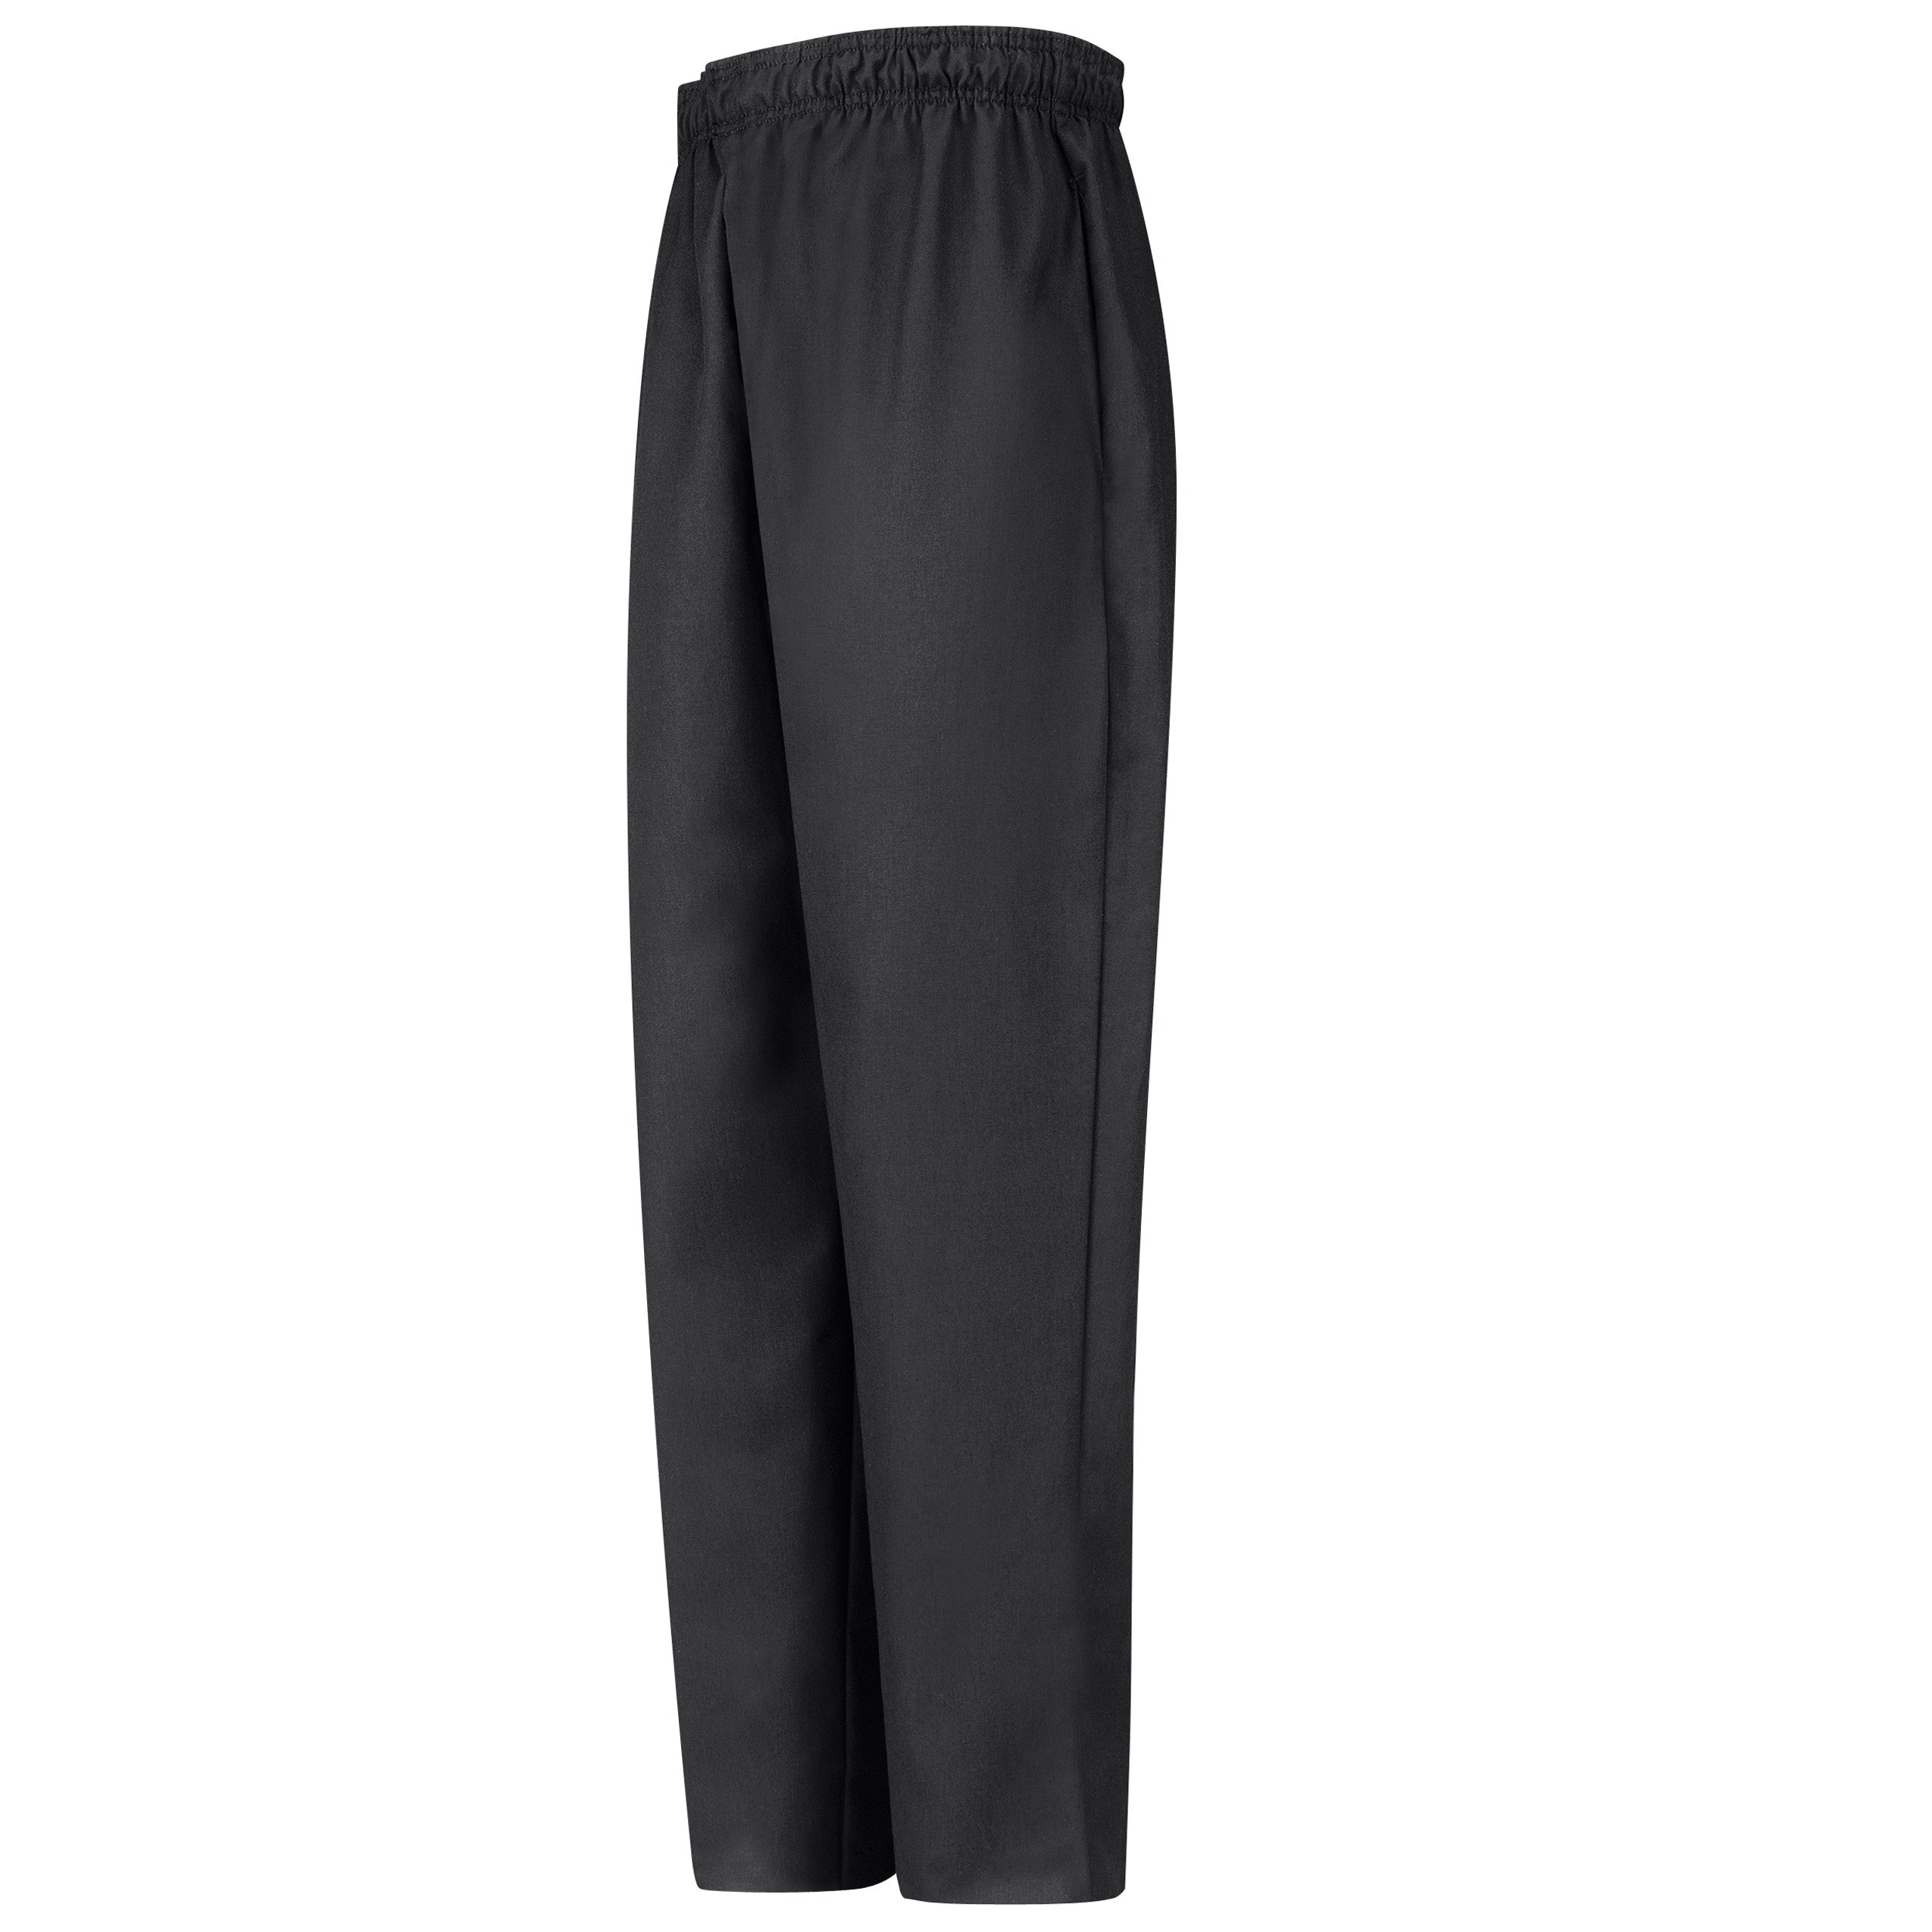 Men's Baggy Chef Pant 5360 - Black-eSafety Supplies, Inc